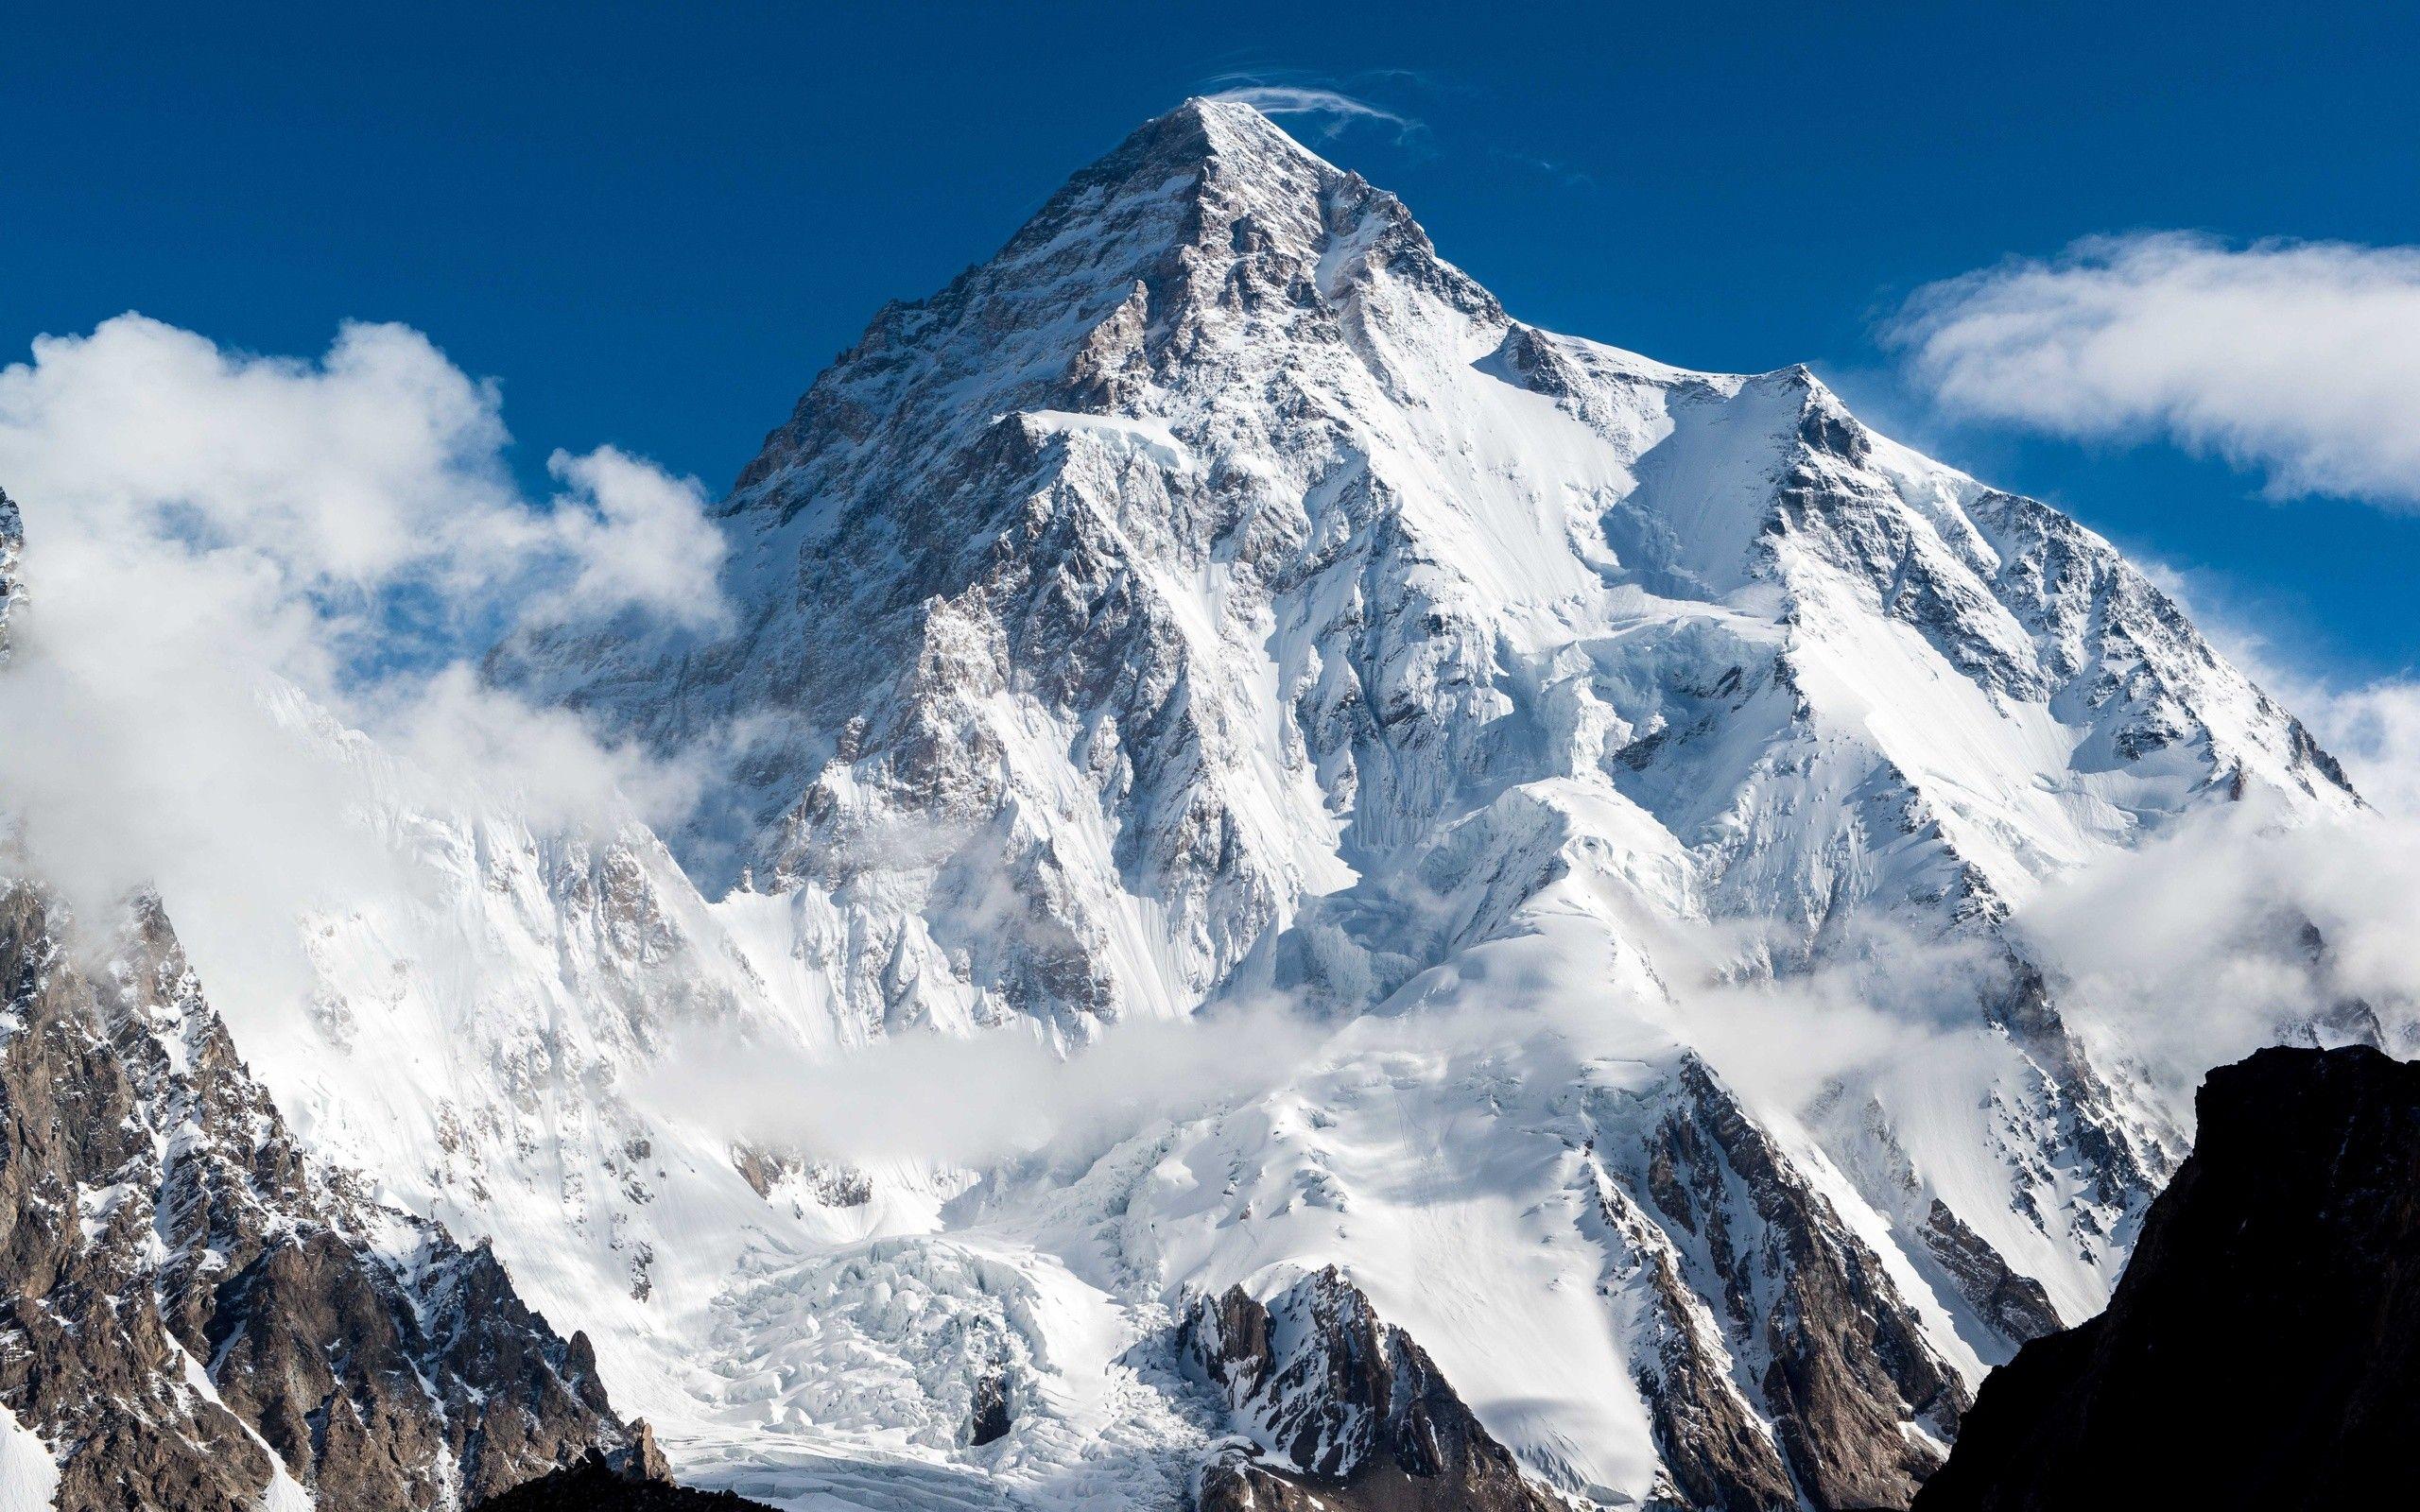 Mountains: Himalayas Peak Snow Slope Nature Photo Best for HD 16:9